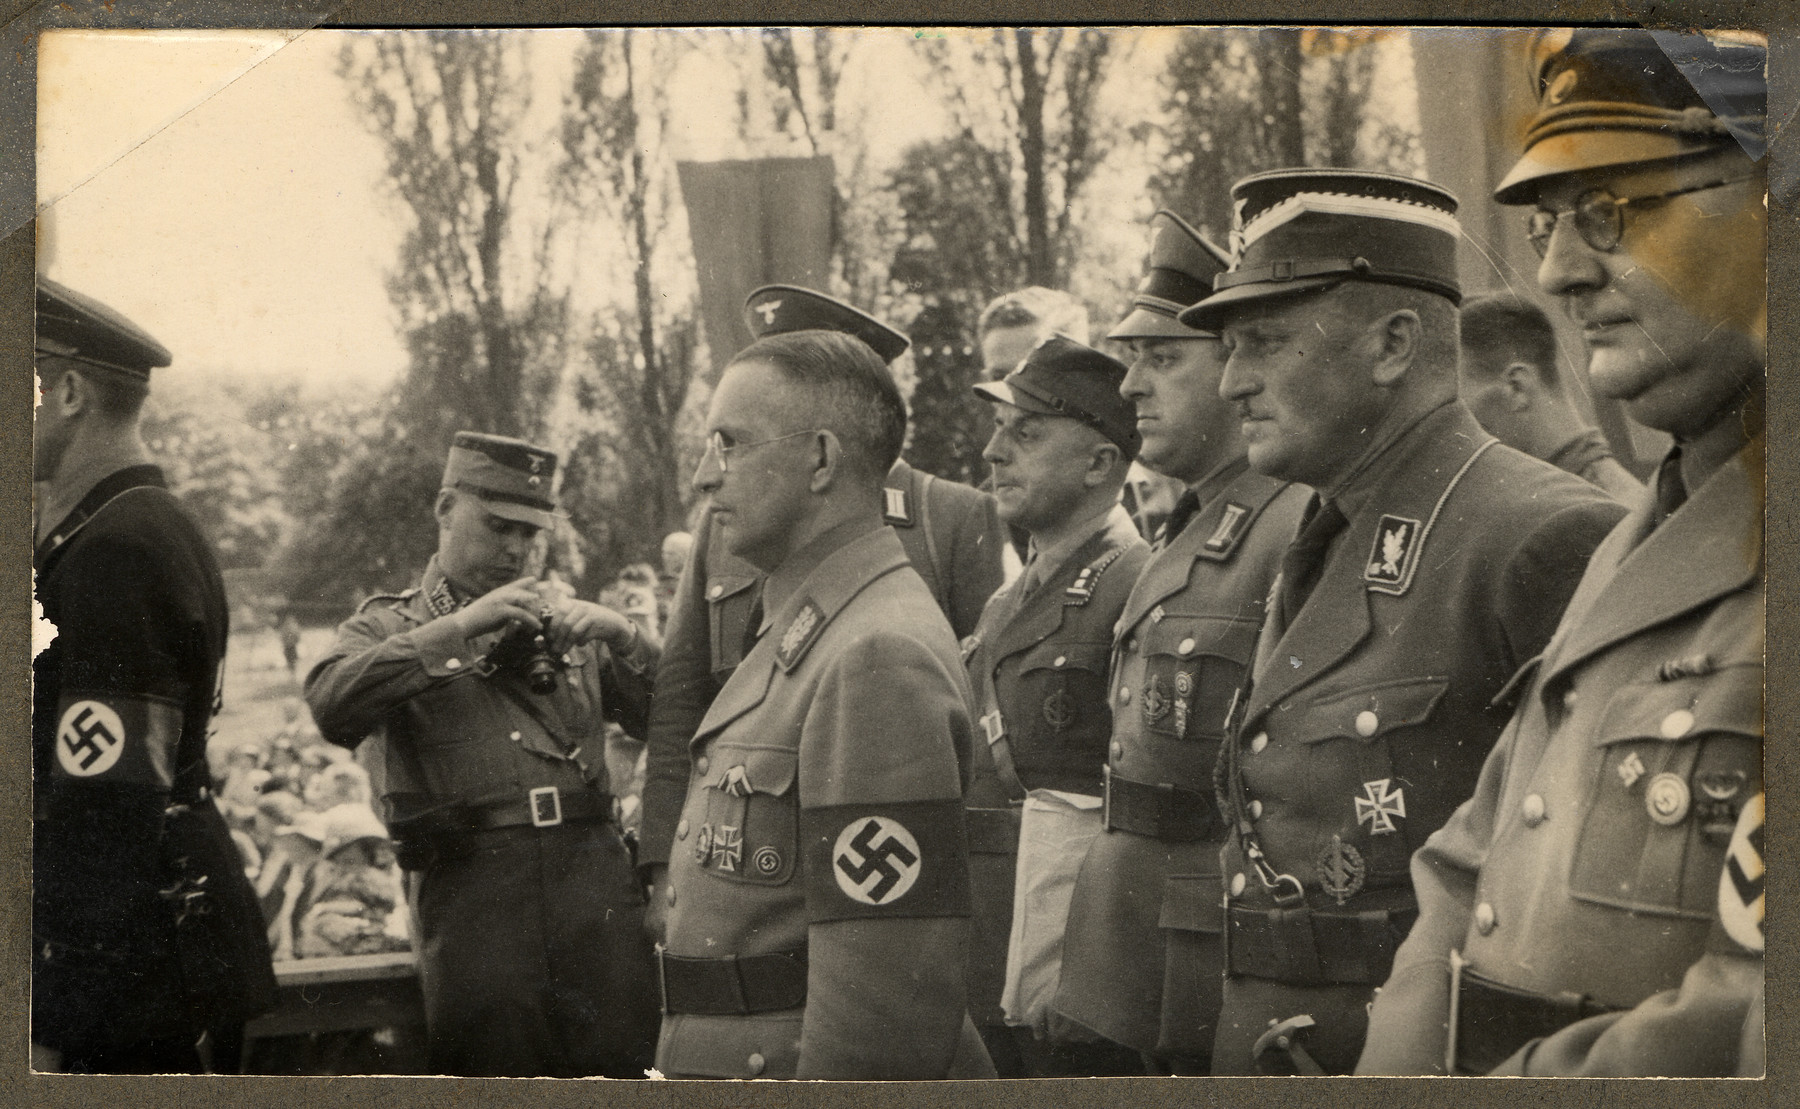 Nazi military officials meet at Gronau, a German town on the border of the Netherlands.

In profile, third from left, is Dr. Alfred Meyer, Gauleiter of Westfalen-Nord and future State Secretary in the Reich Ministry for the Occupied Eastern Territories.